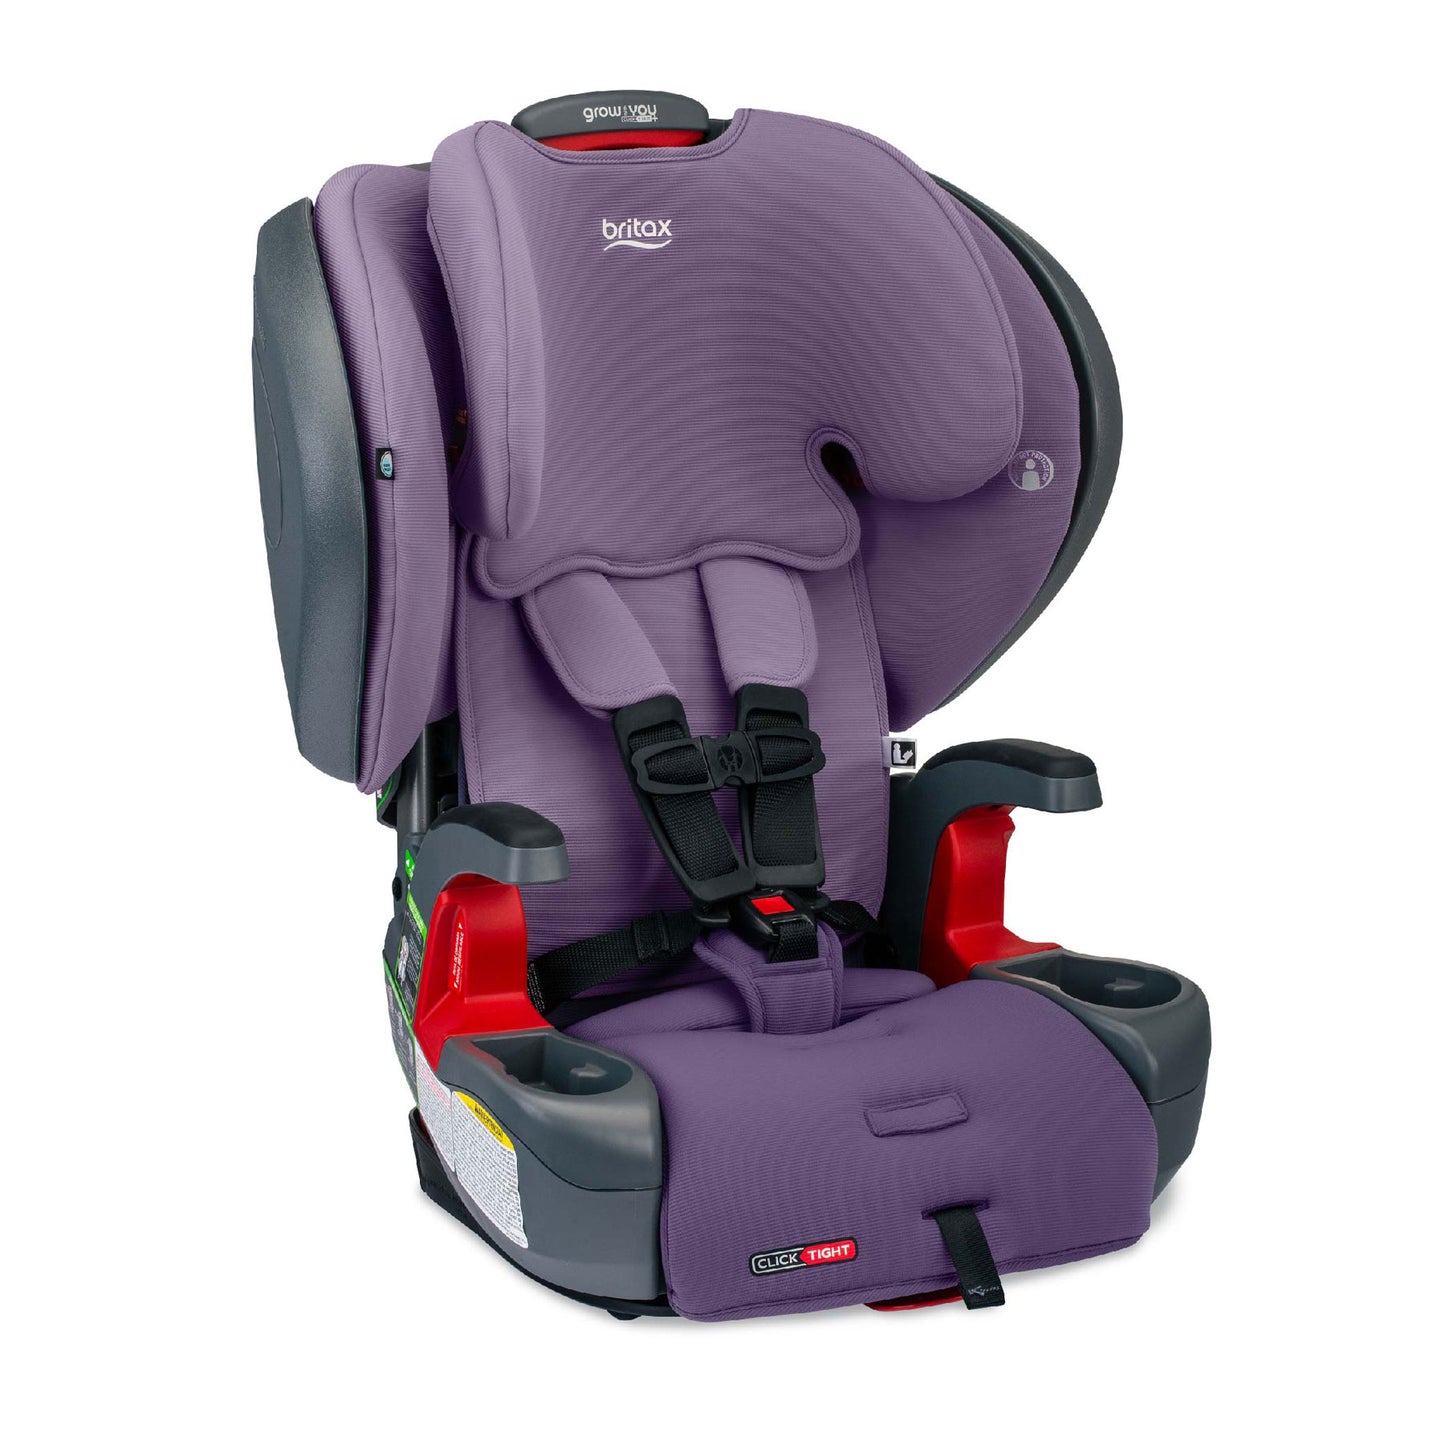 Britax Grow With You ClickTight Plus Harness-2-Booster Seat - Purple Ombre Safewash